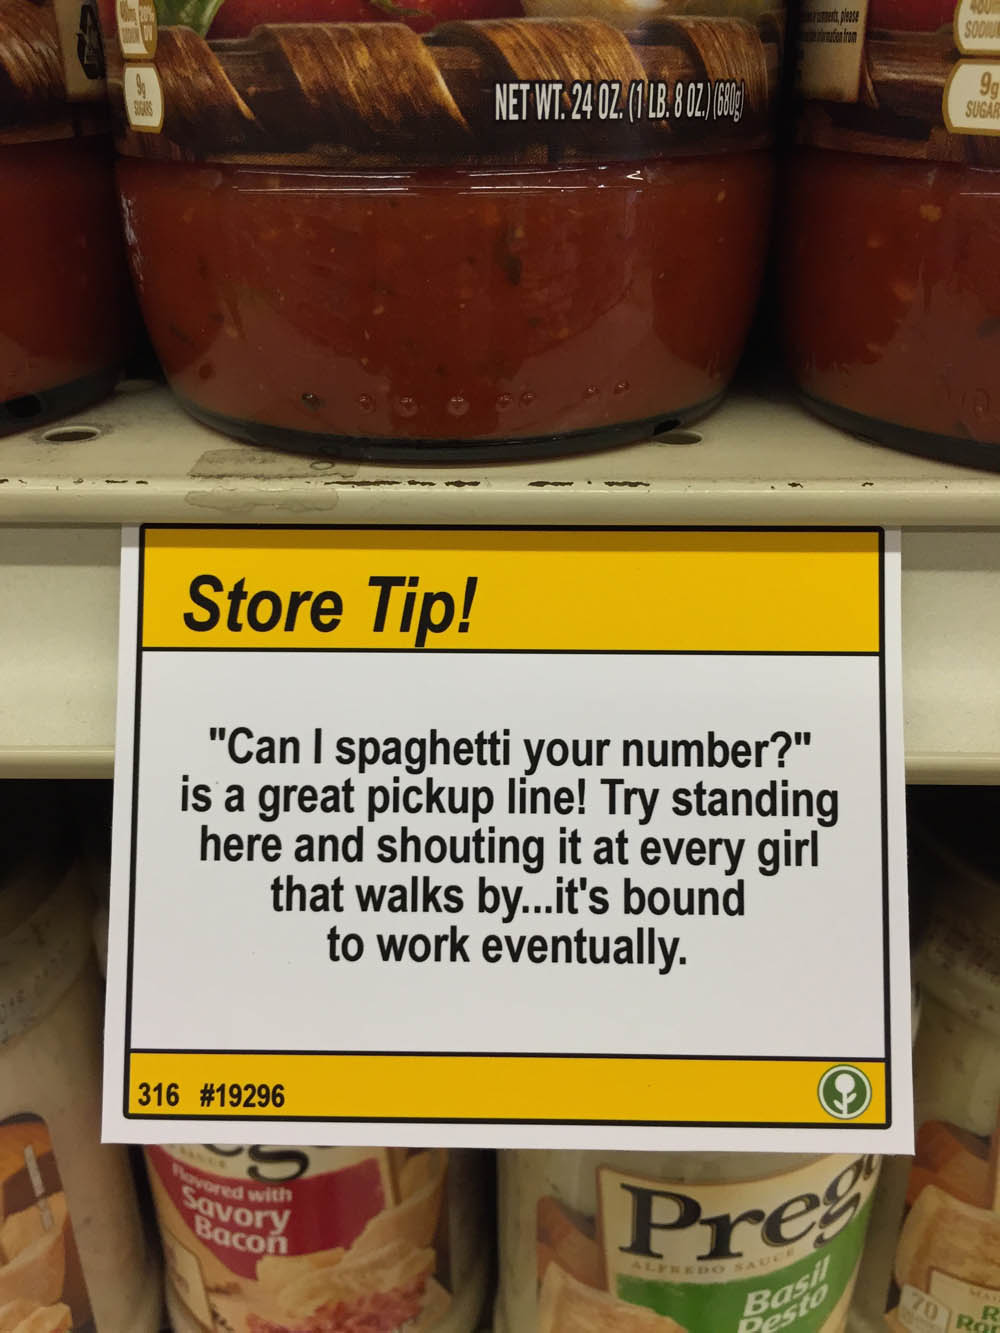 store tips - Net Wt. 24 Oz. 1 Lb. 807680. Store Tip! "Can I spaghetti your number?" is a great pickup line! Try standing here and shouting it at every girl that walks by...it's bound to work eventually. 316 red with Savory Bacon Prey